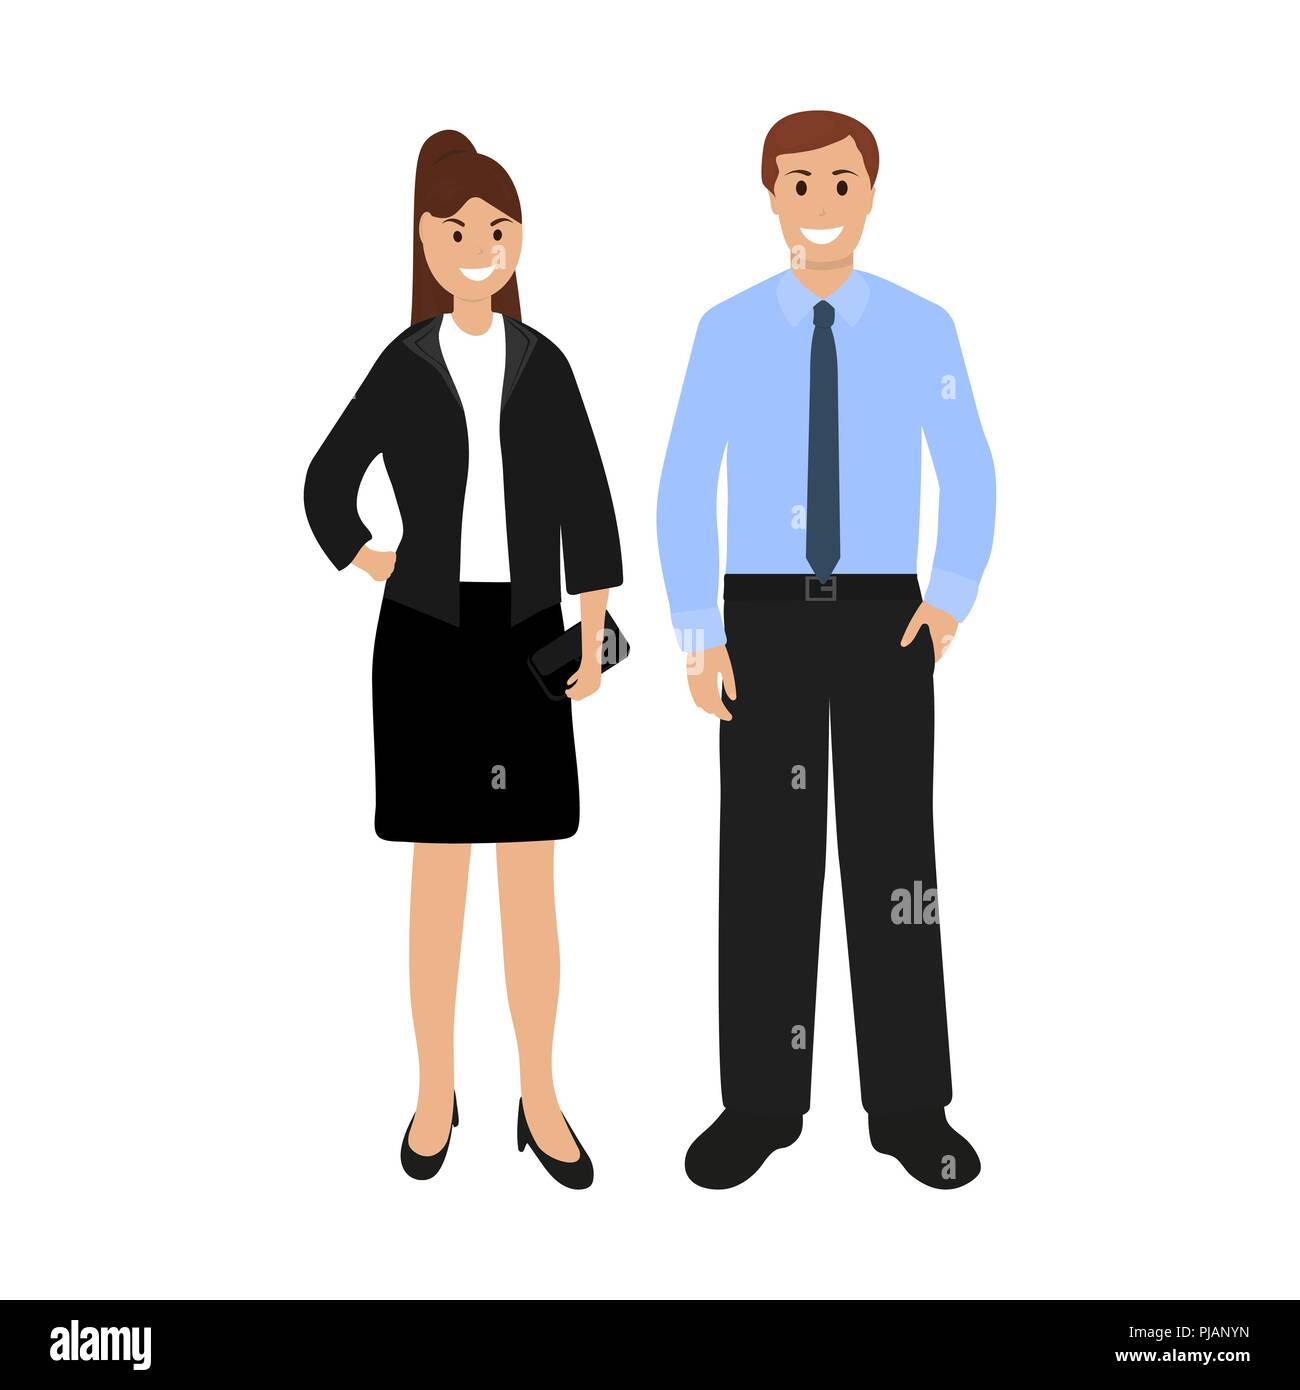 Businessmen woman and man  Stock Vector